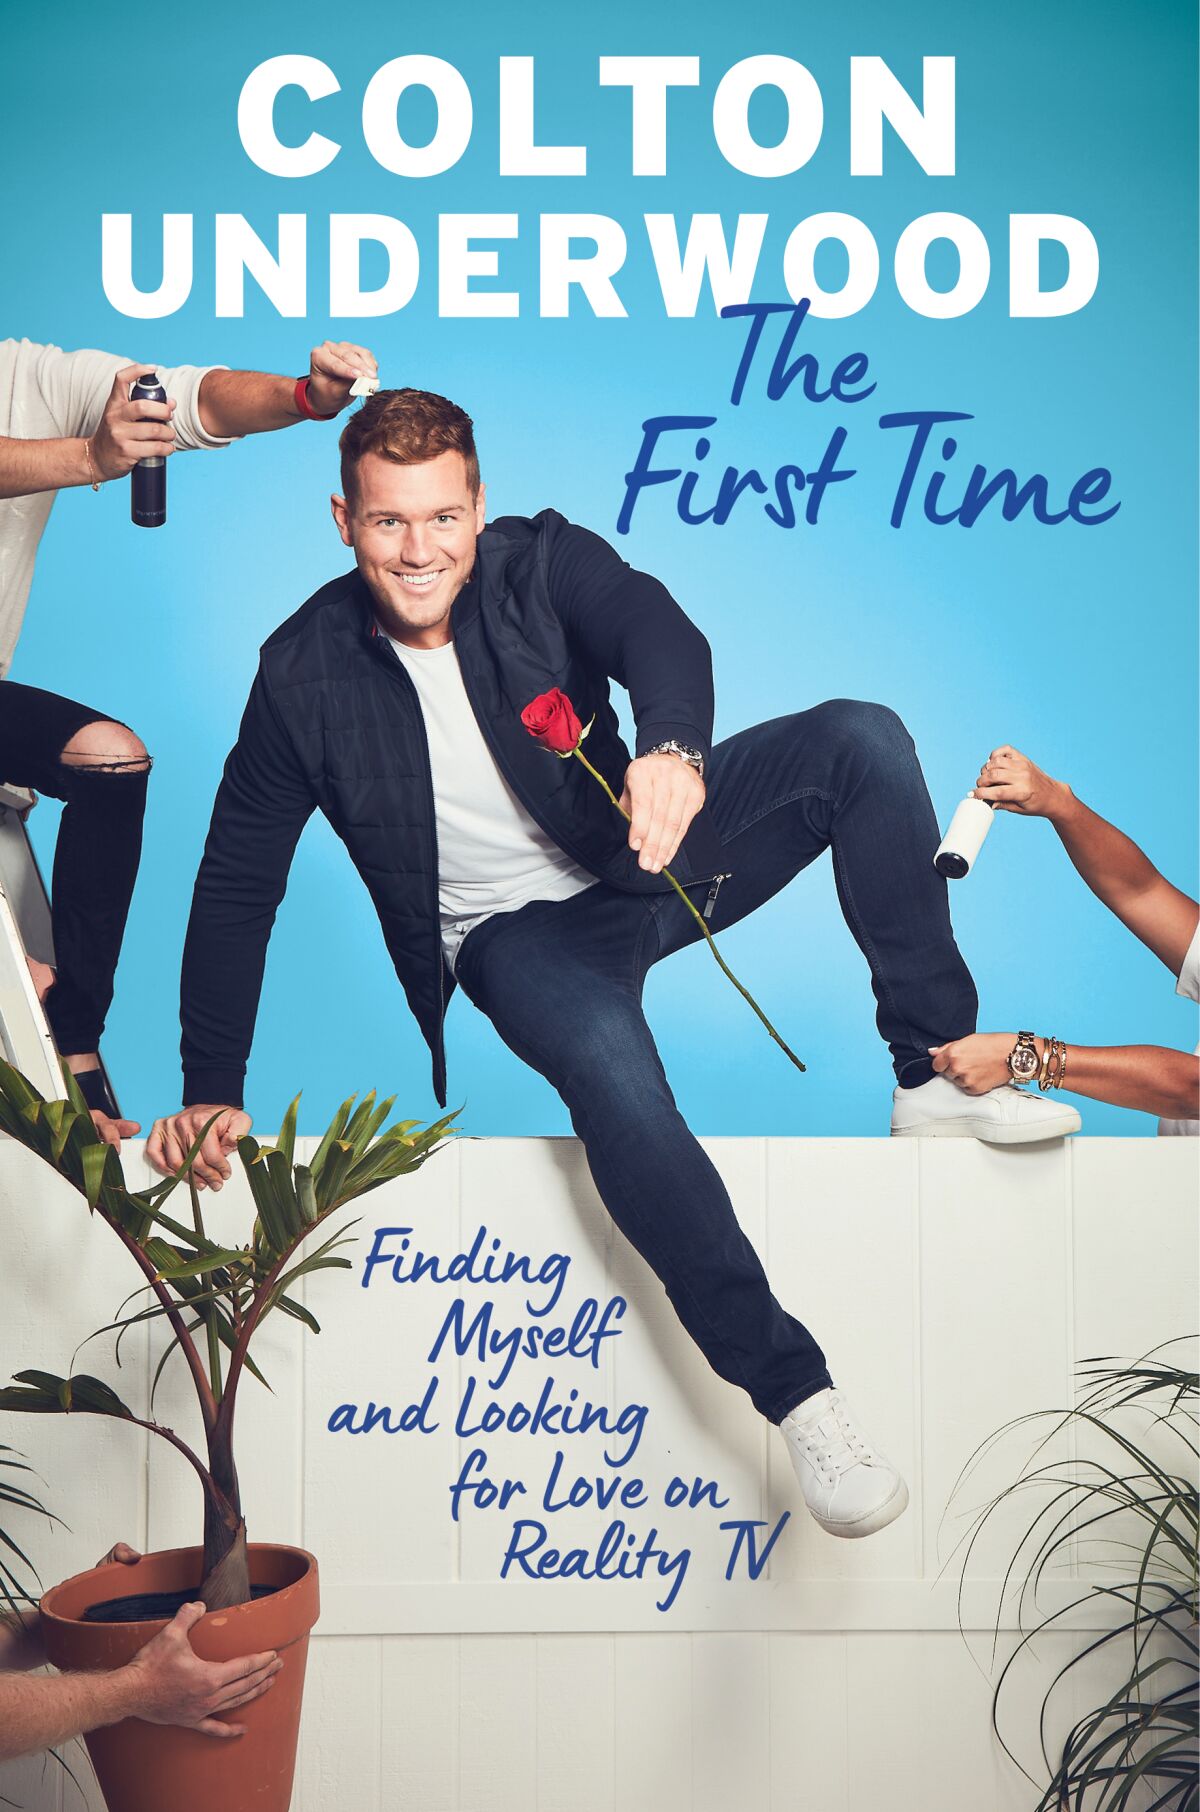 The cover of Colton Underwood's new memoir, "The First Time," out March 31.